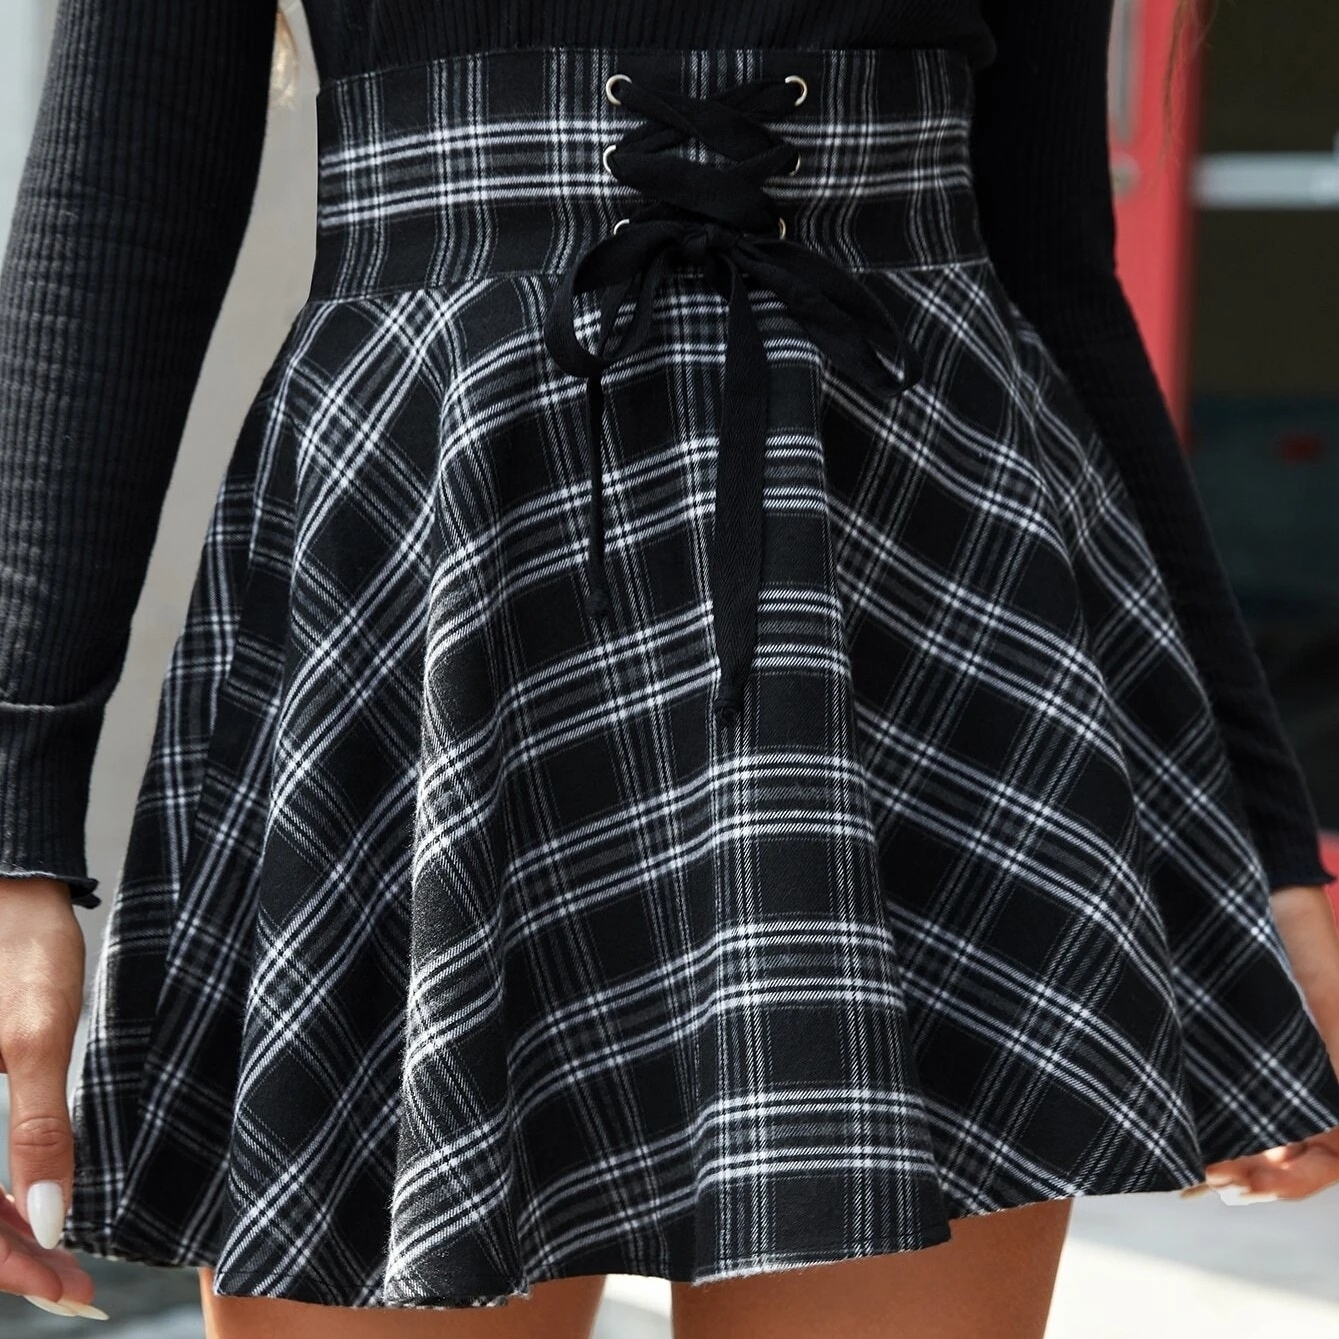 Tartan Print Lace Up Front Flared Skirt - S